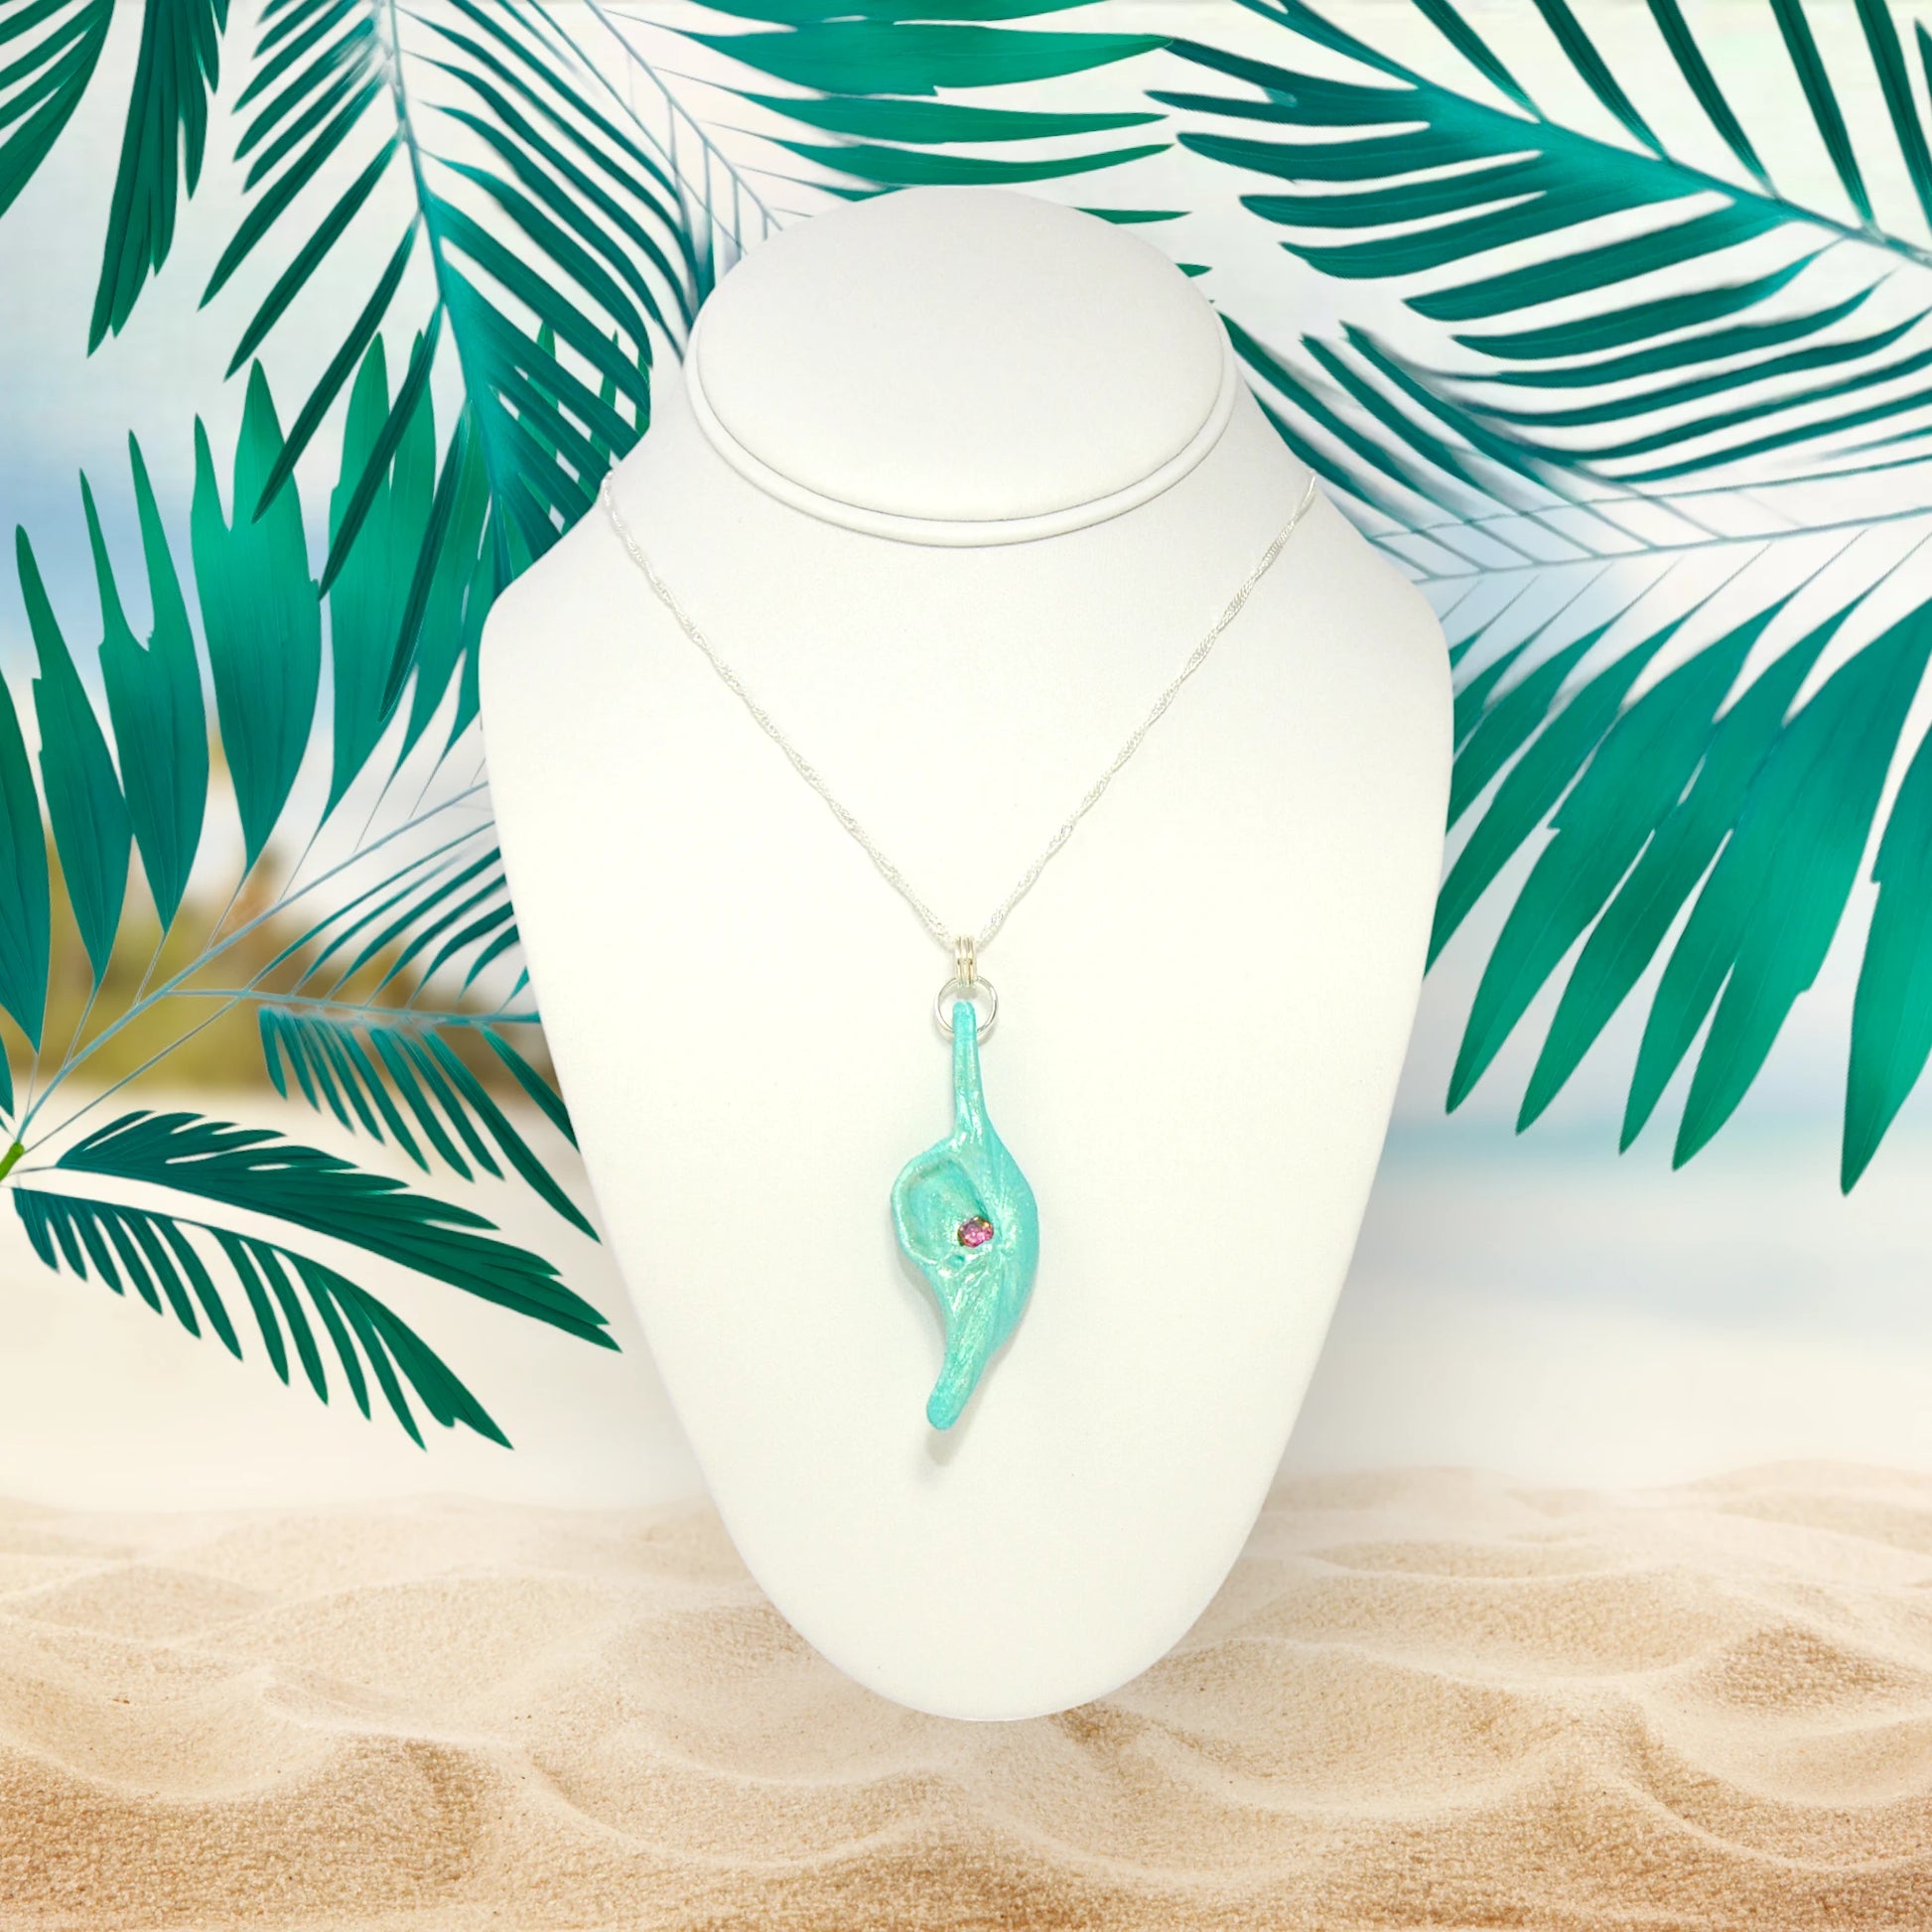 Rio is a natural seashell pendant with a faceted Pink Tourmaline gemstone. The pendant is shown hanging on a white necklace displayer on the sandy beach surrounded by greenery.